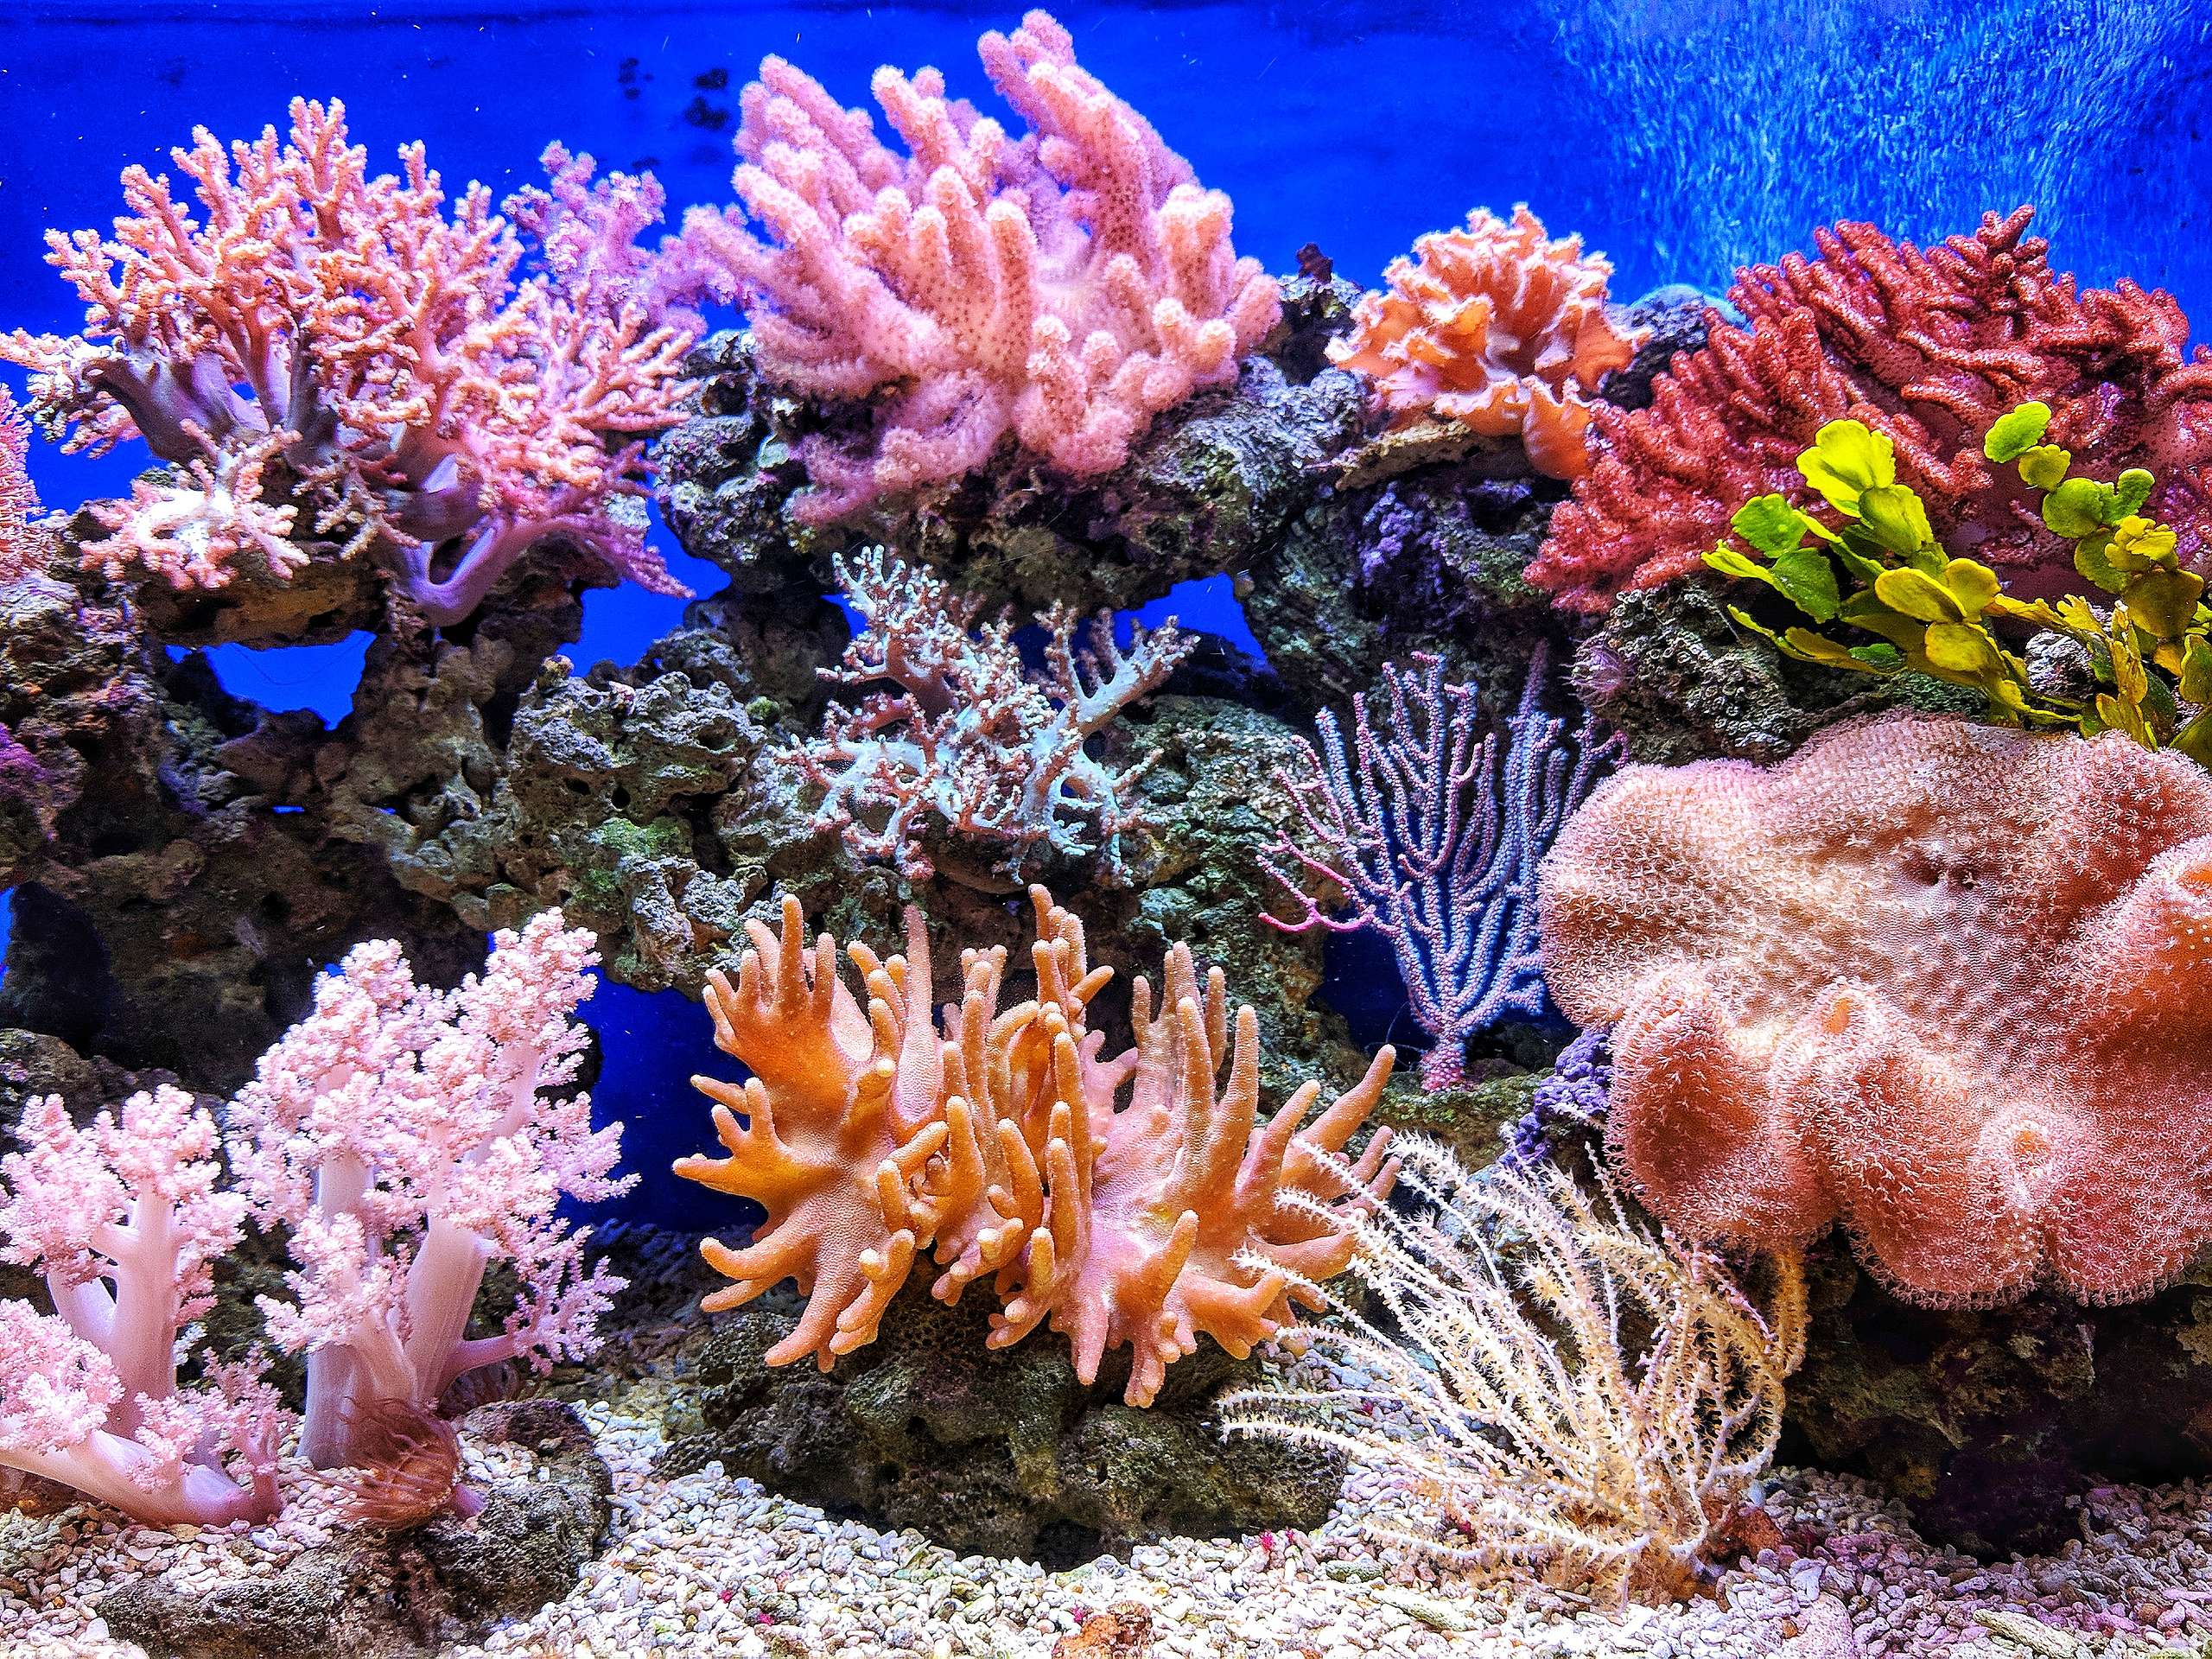 Ocean corals are vital to the health of the ecosystem